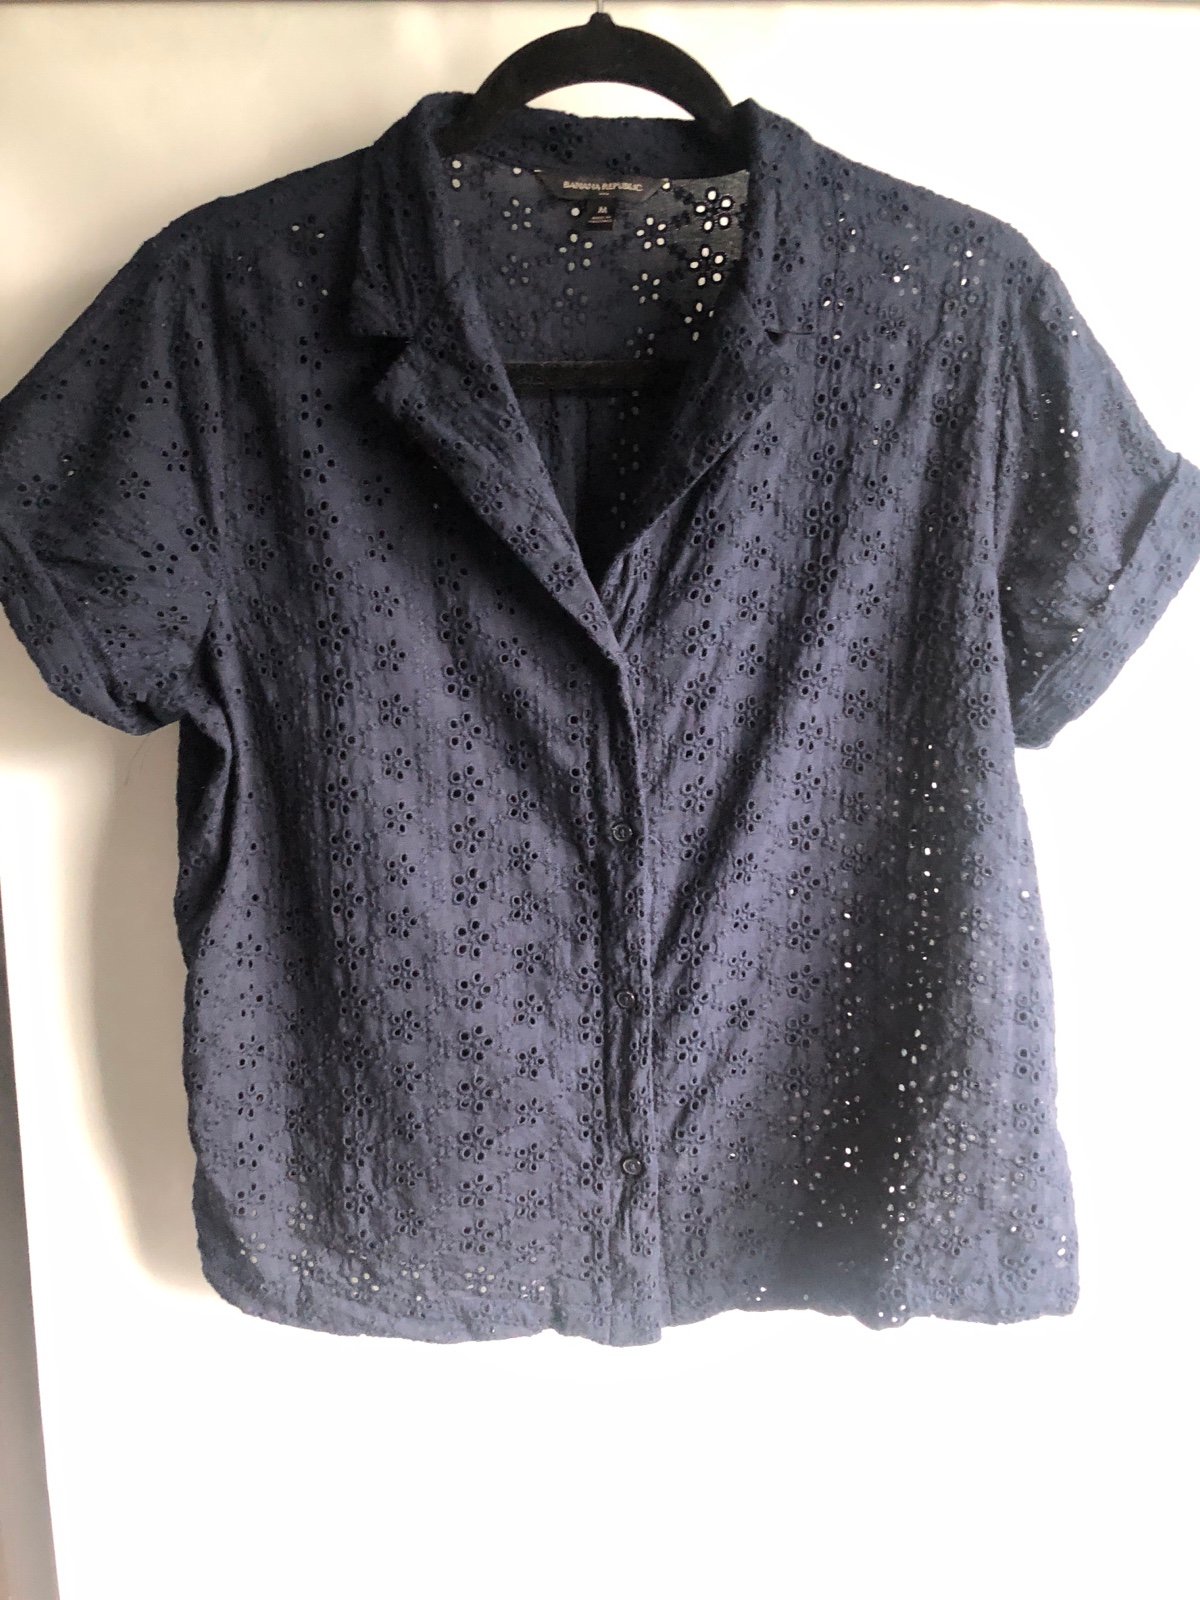 Classic Eyelet blouse by Banana Republic PRUo6NzGD Counter Genuine 